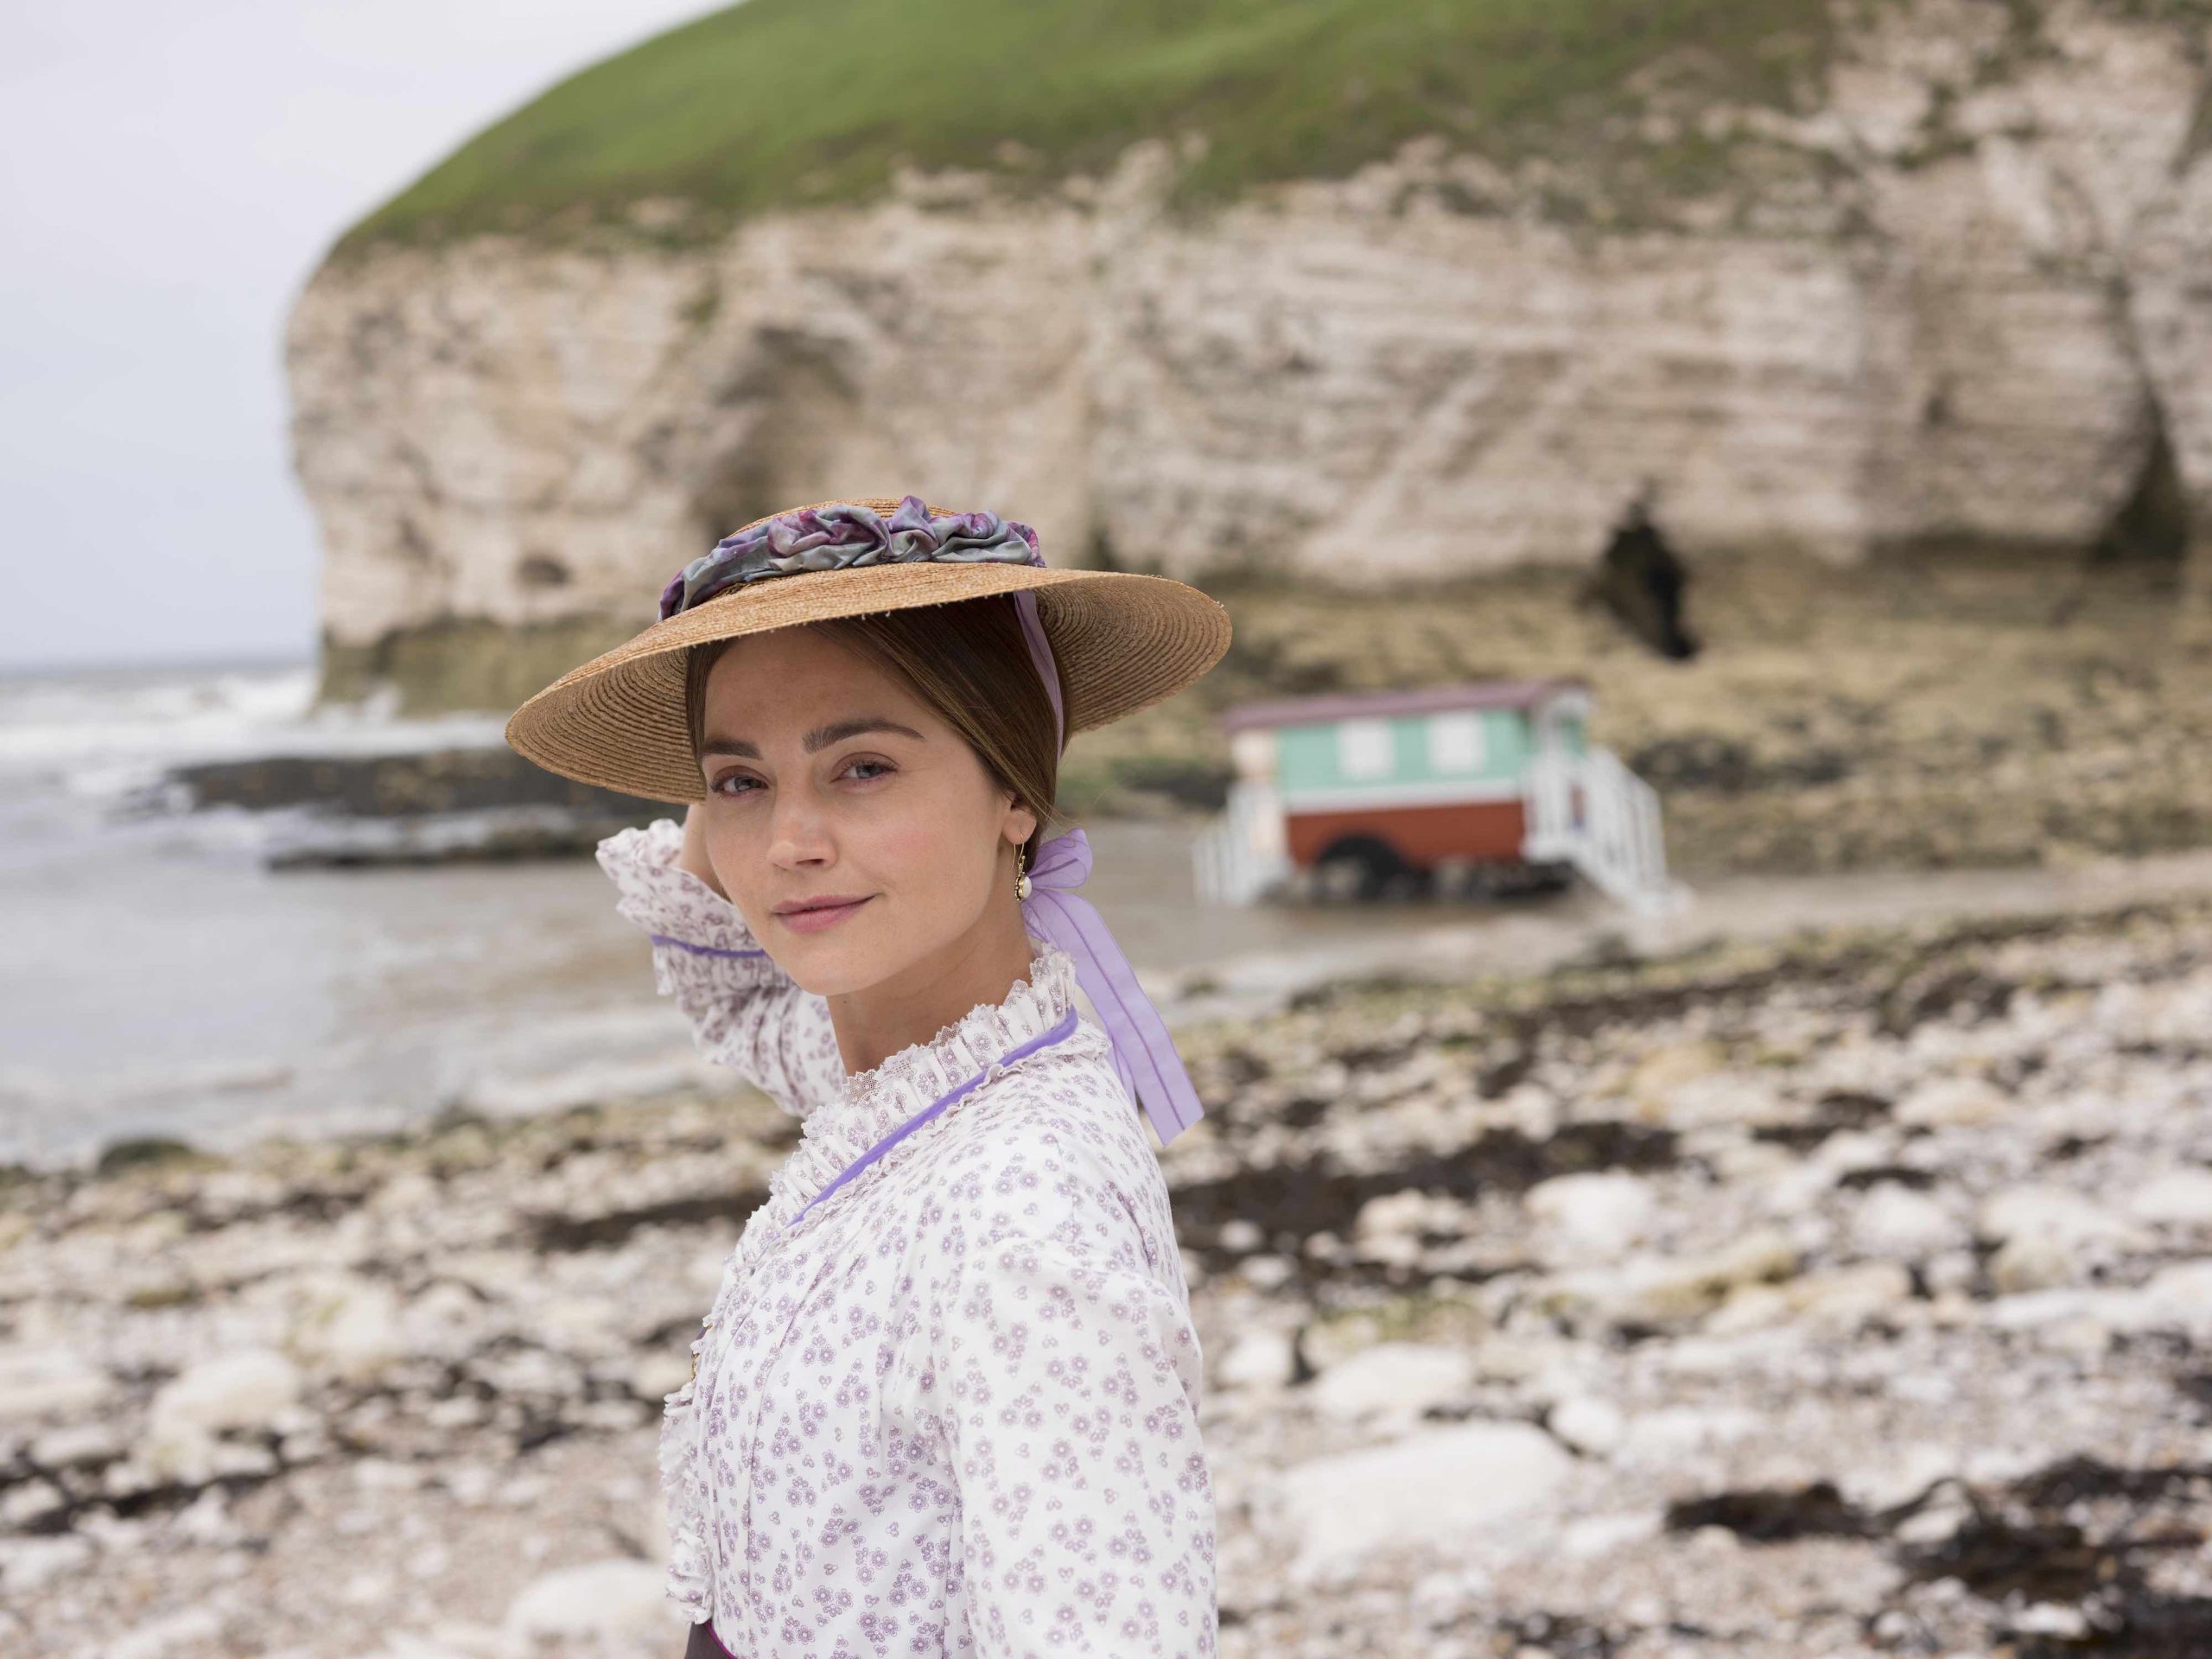 Jenna Coleman as Queen Victoria wearing a straw hat and standing on a beach 